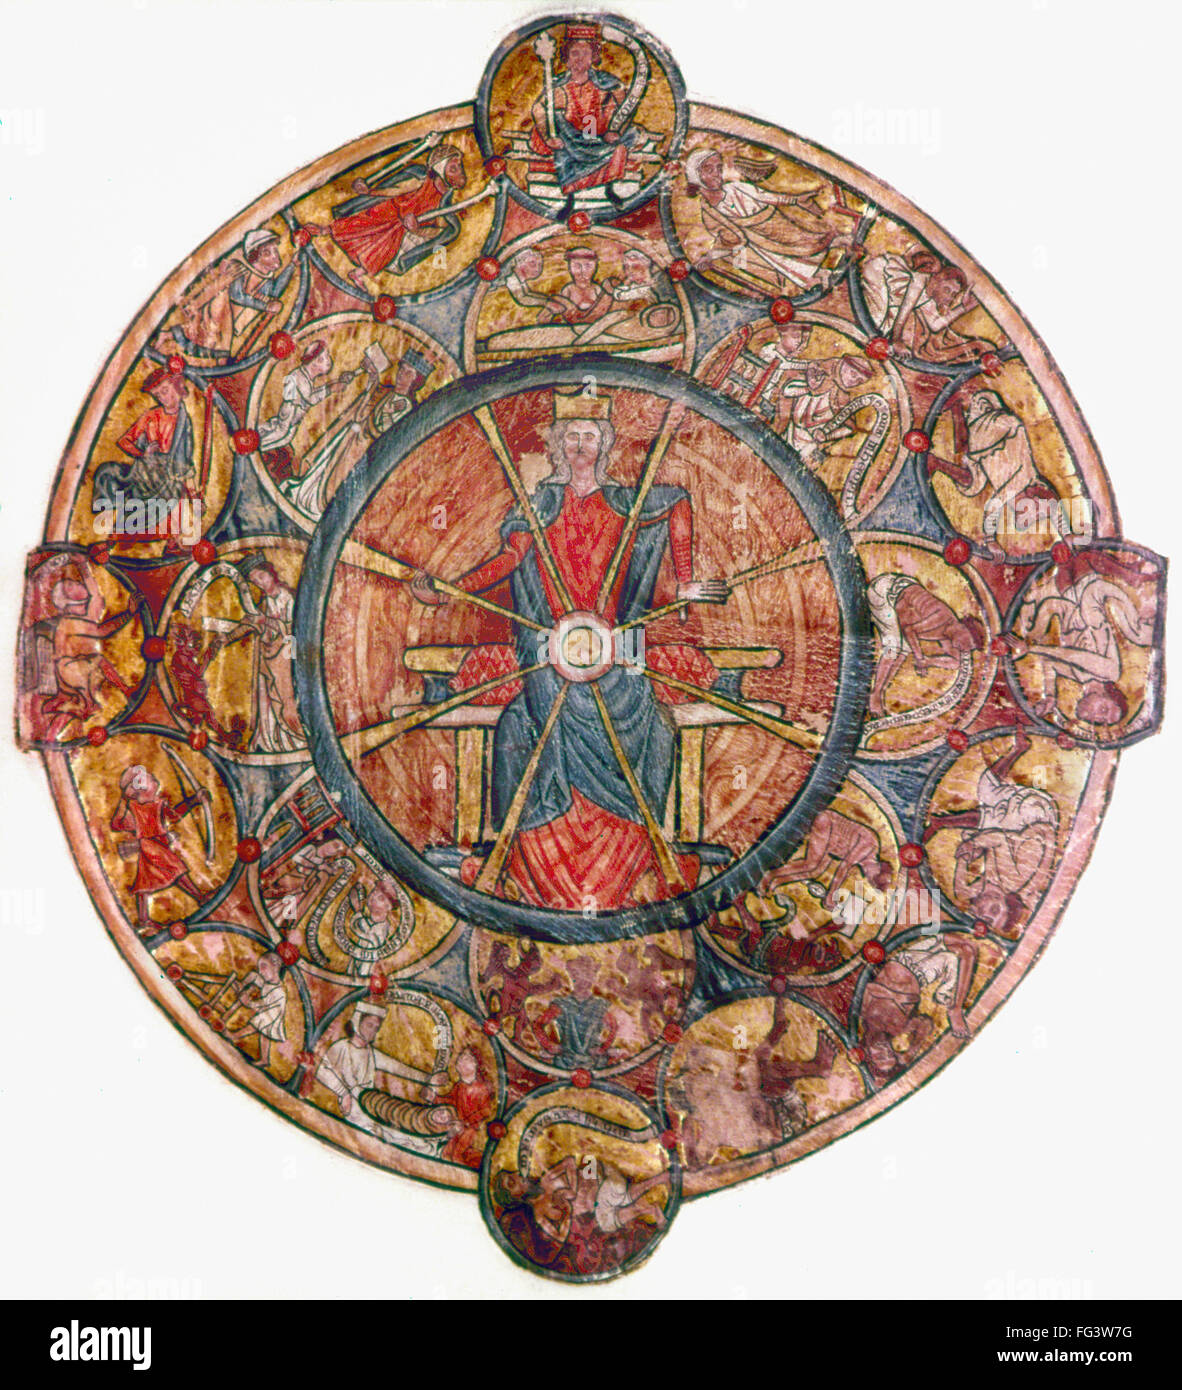 THEOPHILUS OF ADANA /n(d. c538). Also known as Saint Theophilus the Penitent. Orthodox cleric; archdeacon of Adana, Cilicia. The story of Theophilus depicted with imagery of the Wheel of Fortune and the Ages of Man. Illumination from an English psalter by Stock Photo